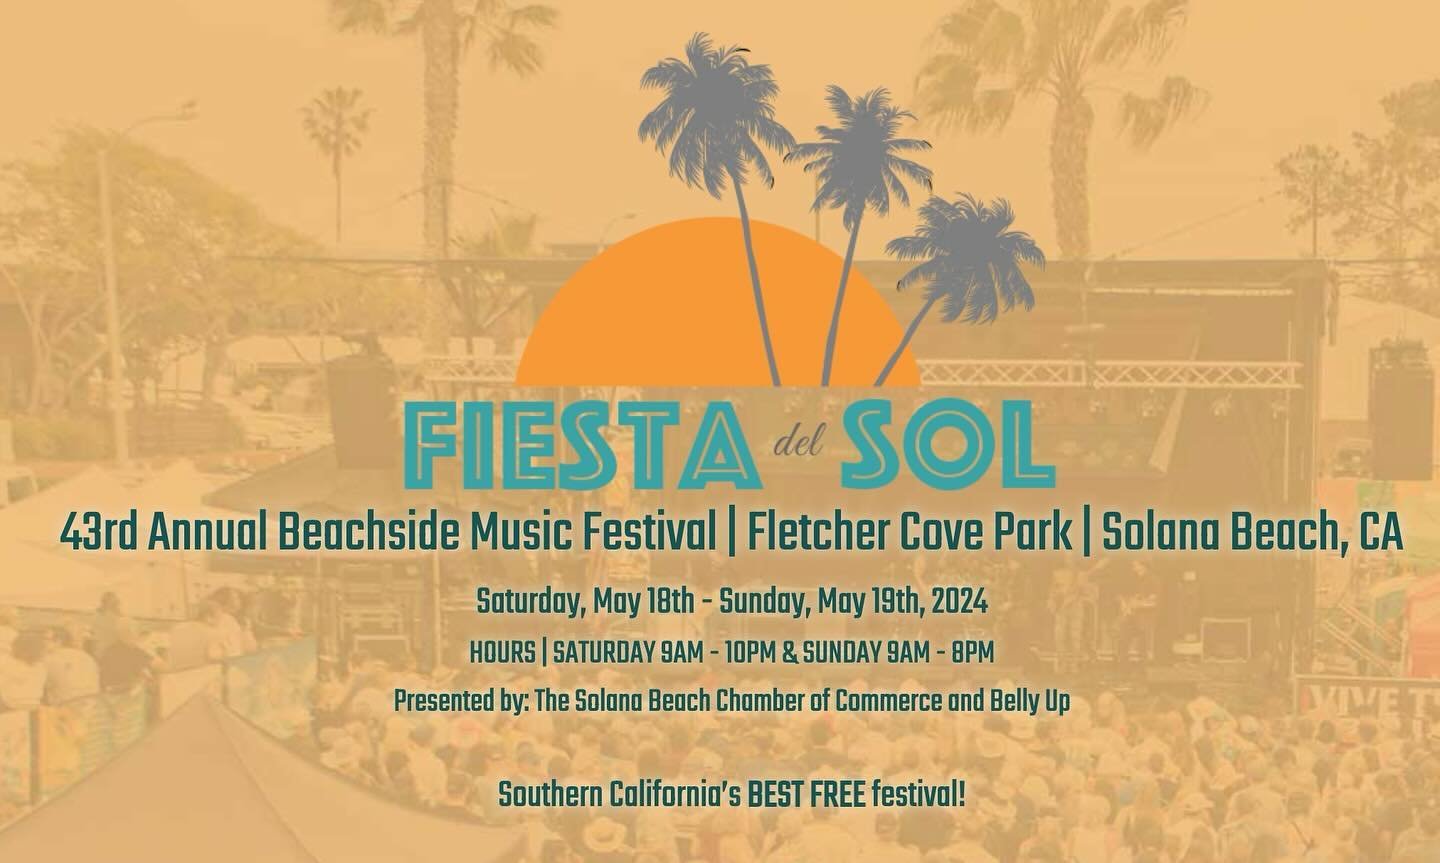 Join us this Saturday and Sunday for Fiesta Del Sol, the best free music festival around. We will be opening early at 11am both days for all your beer needs. 

Come take a break from the crowds and enjoy a beer or two with us on the patio all weekend